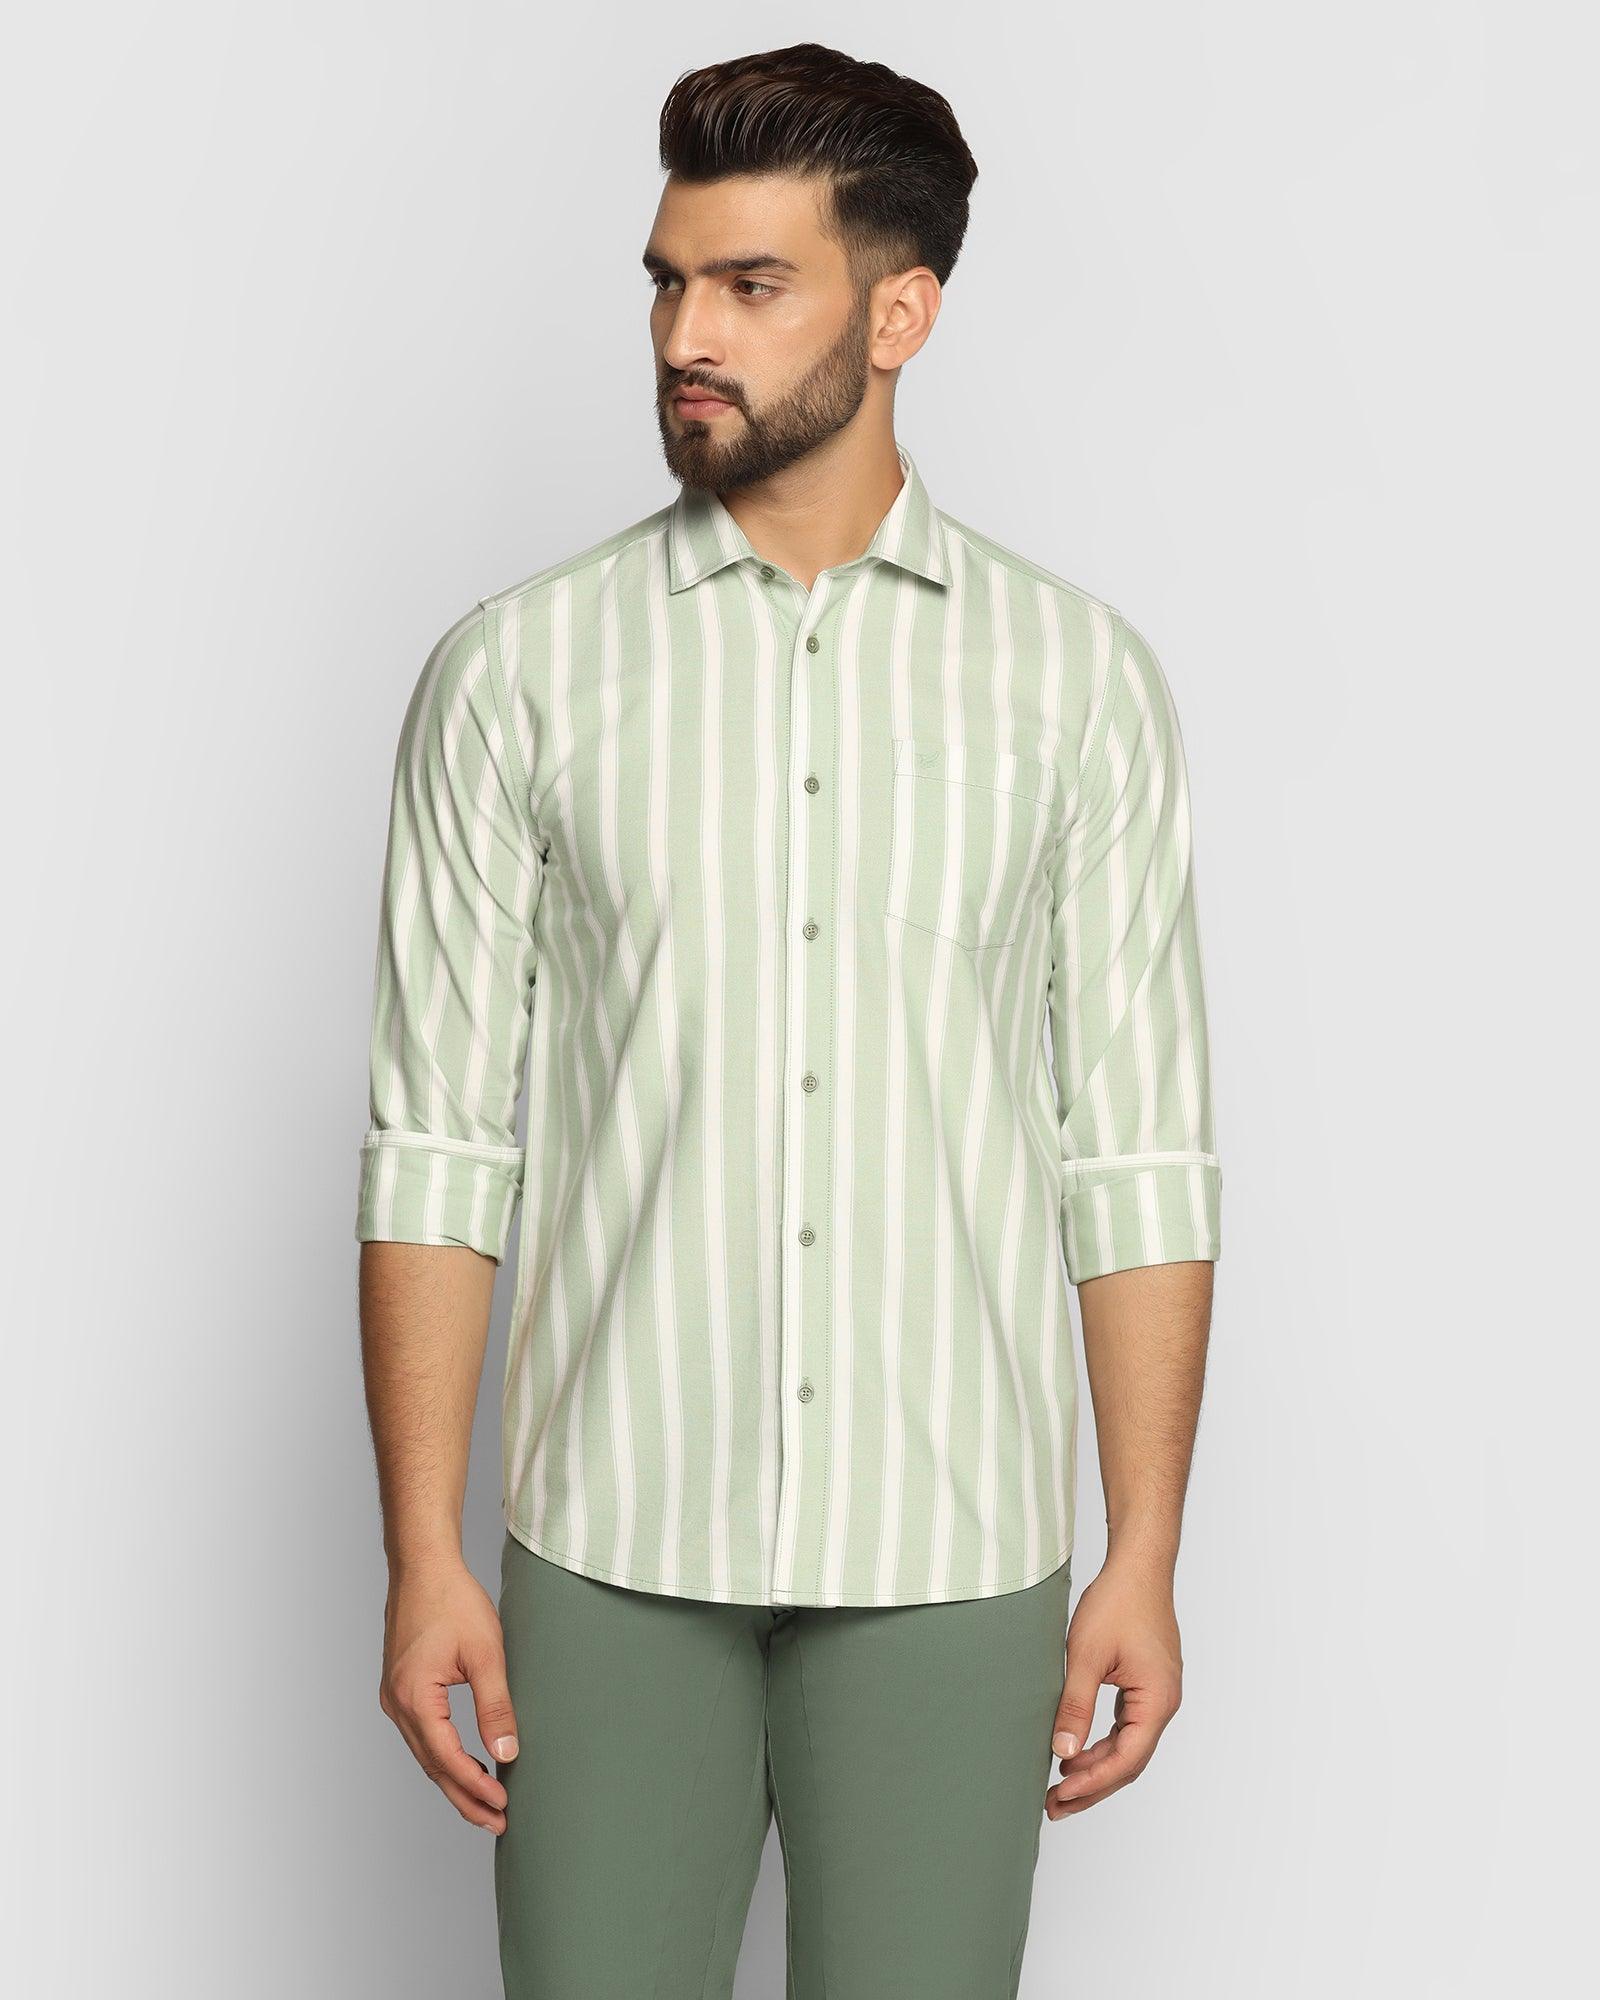 Casual Olive Striped Shirt - Polly